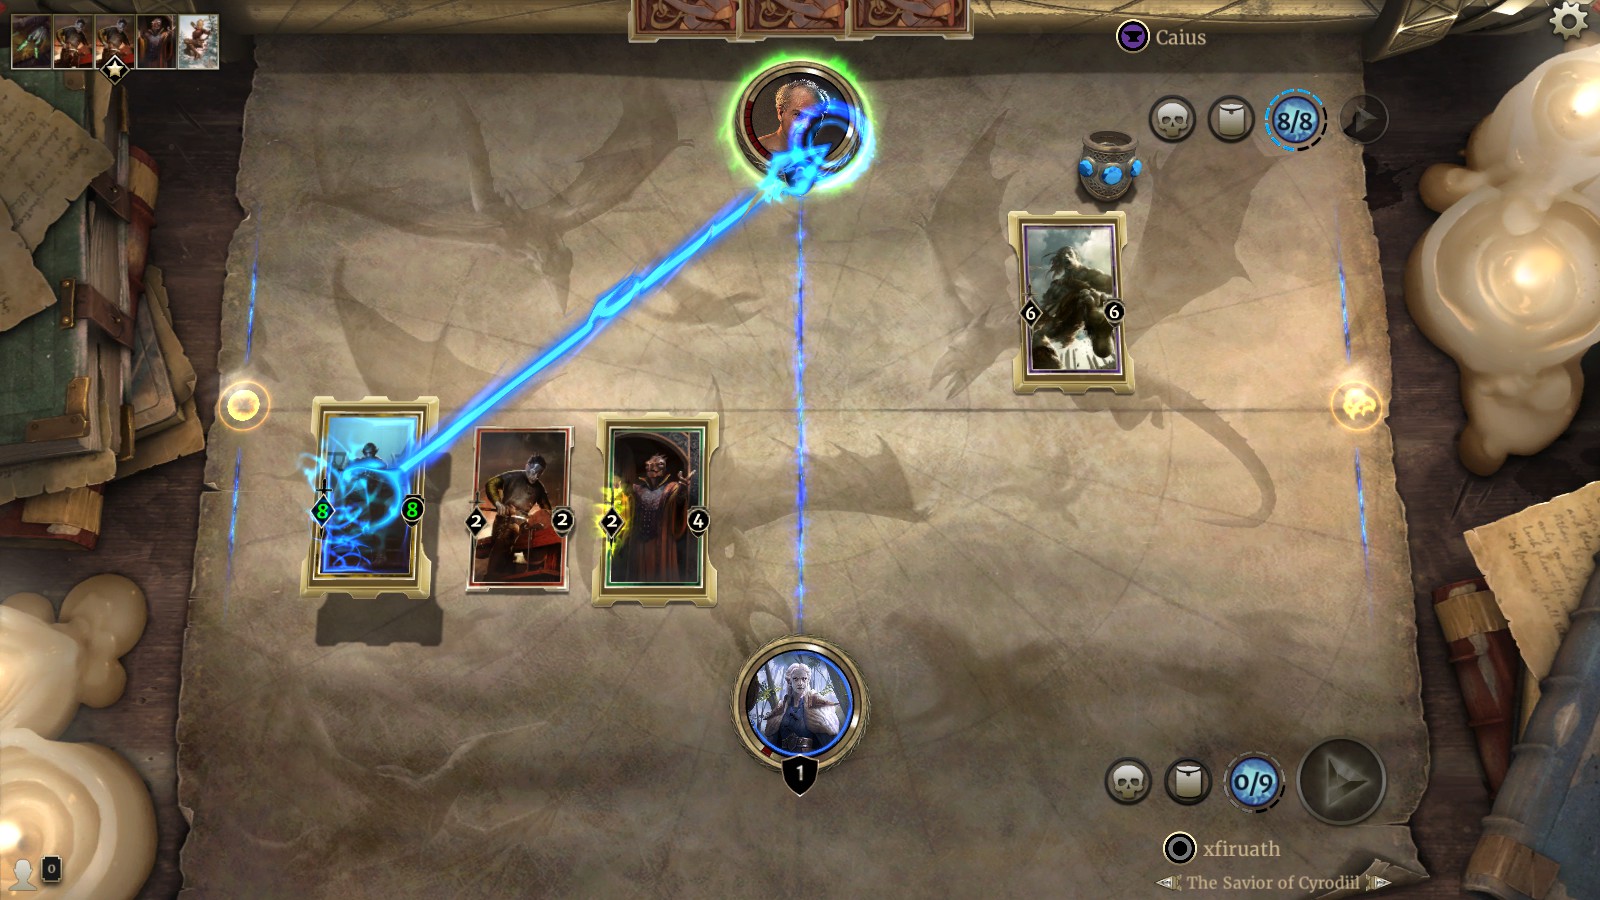 cards attacking other cards during the Hlaalu Initiation puzzle in Houses of Morrowind